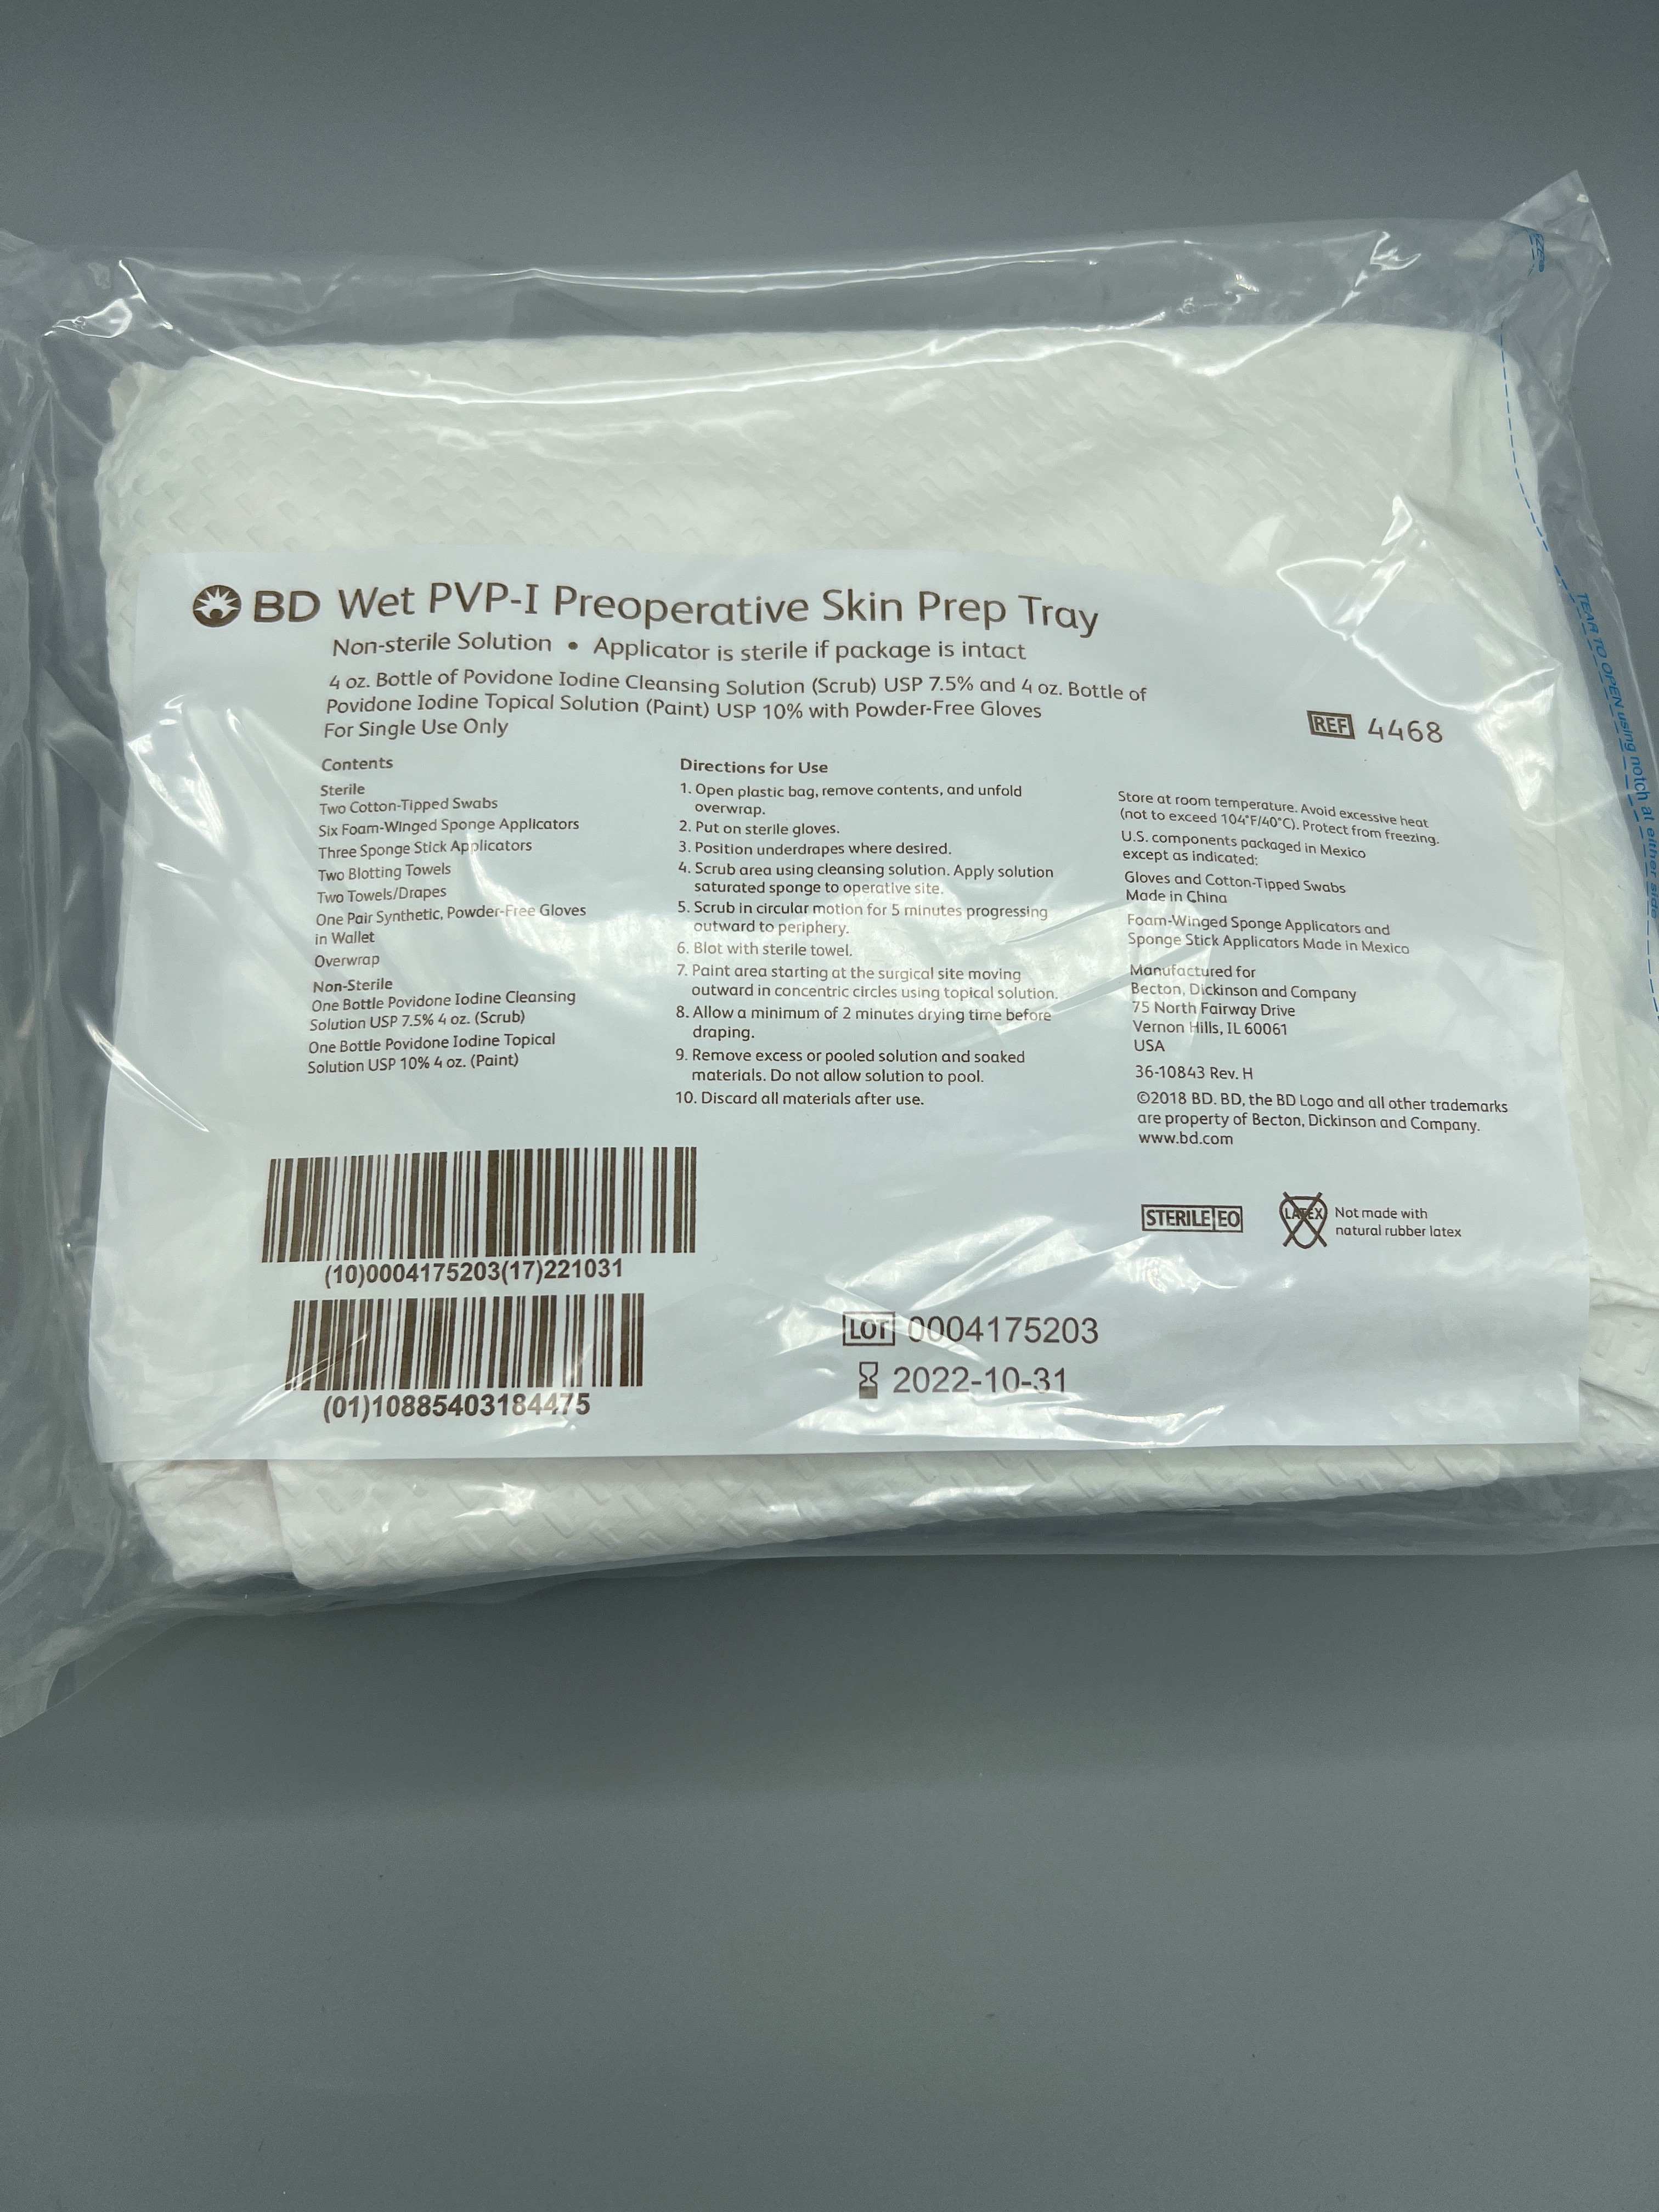 WET PVP- IPREOPERATIVE SKIN PREP TRAY 4OZ BOTTLE OF POVIDONE IODINE CLEANSING SOLUTION USP 7.5% AND 4OZ